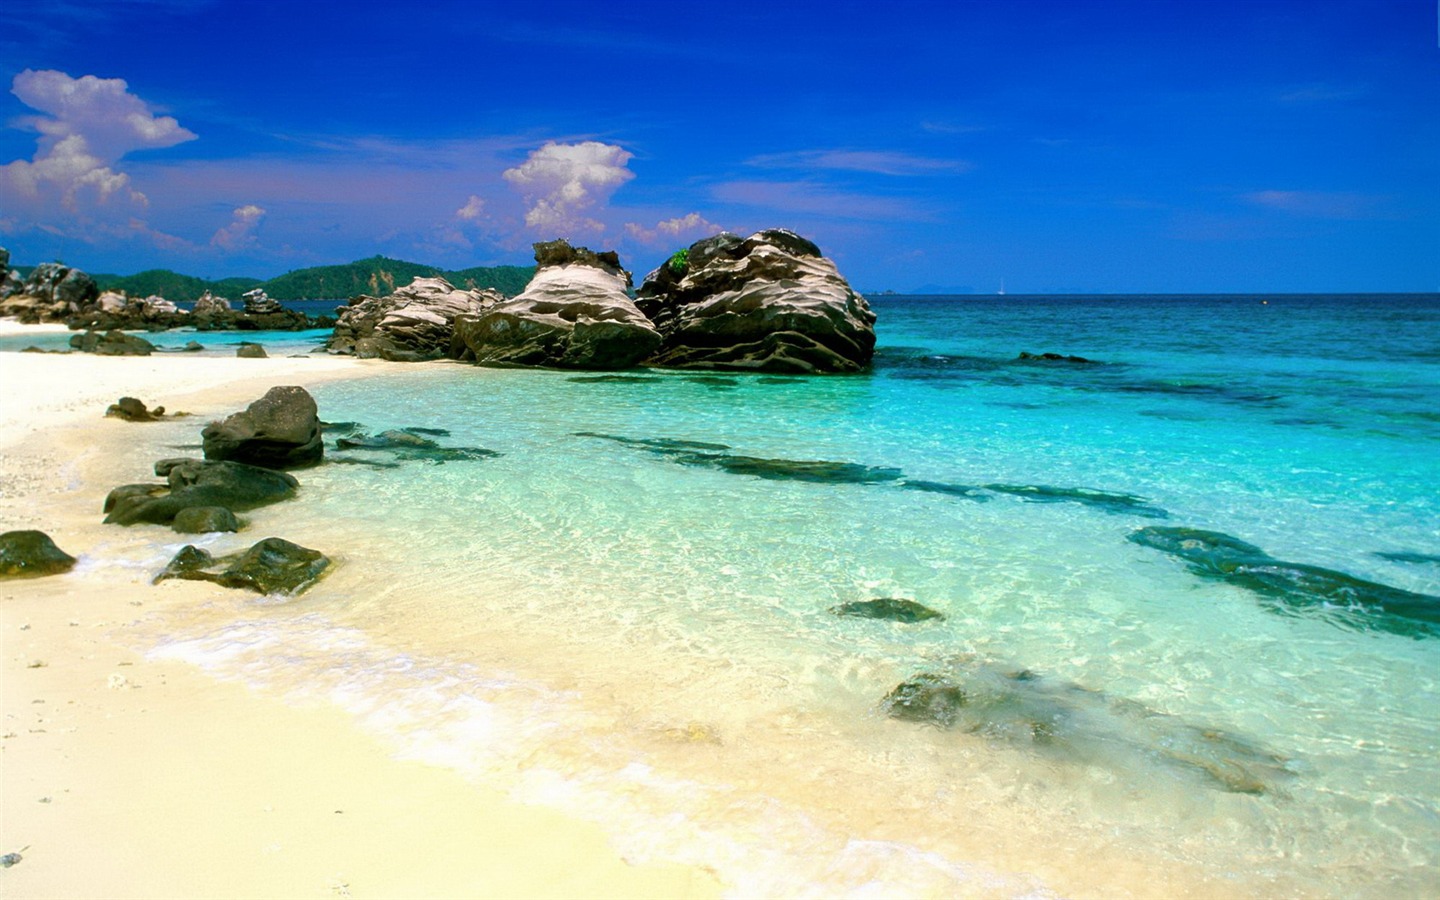 Thailand's natural beauty wallpapers #3 - 1440x900